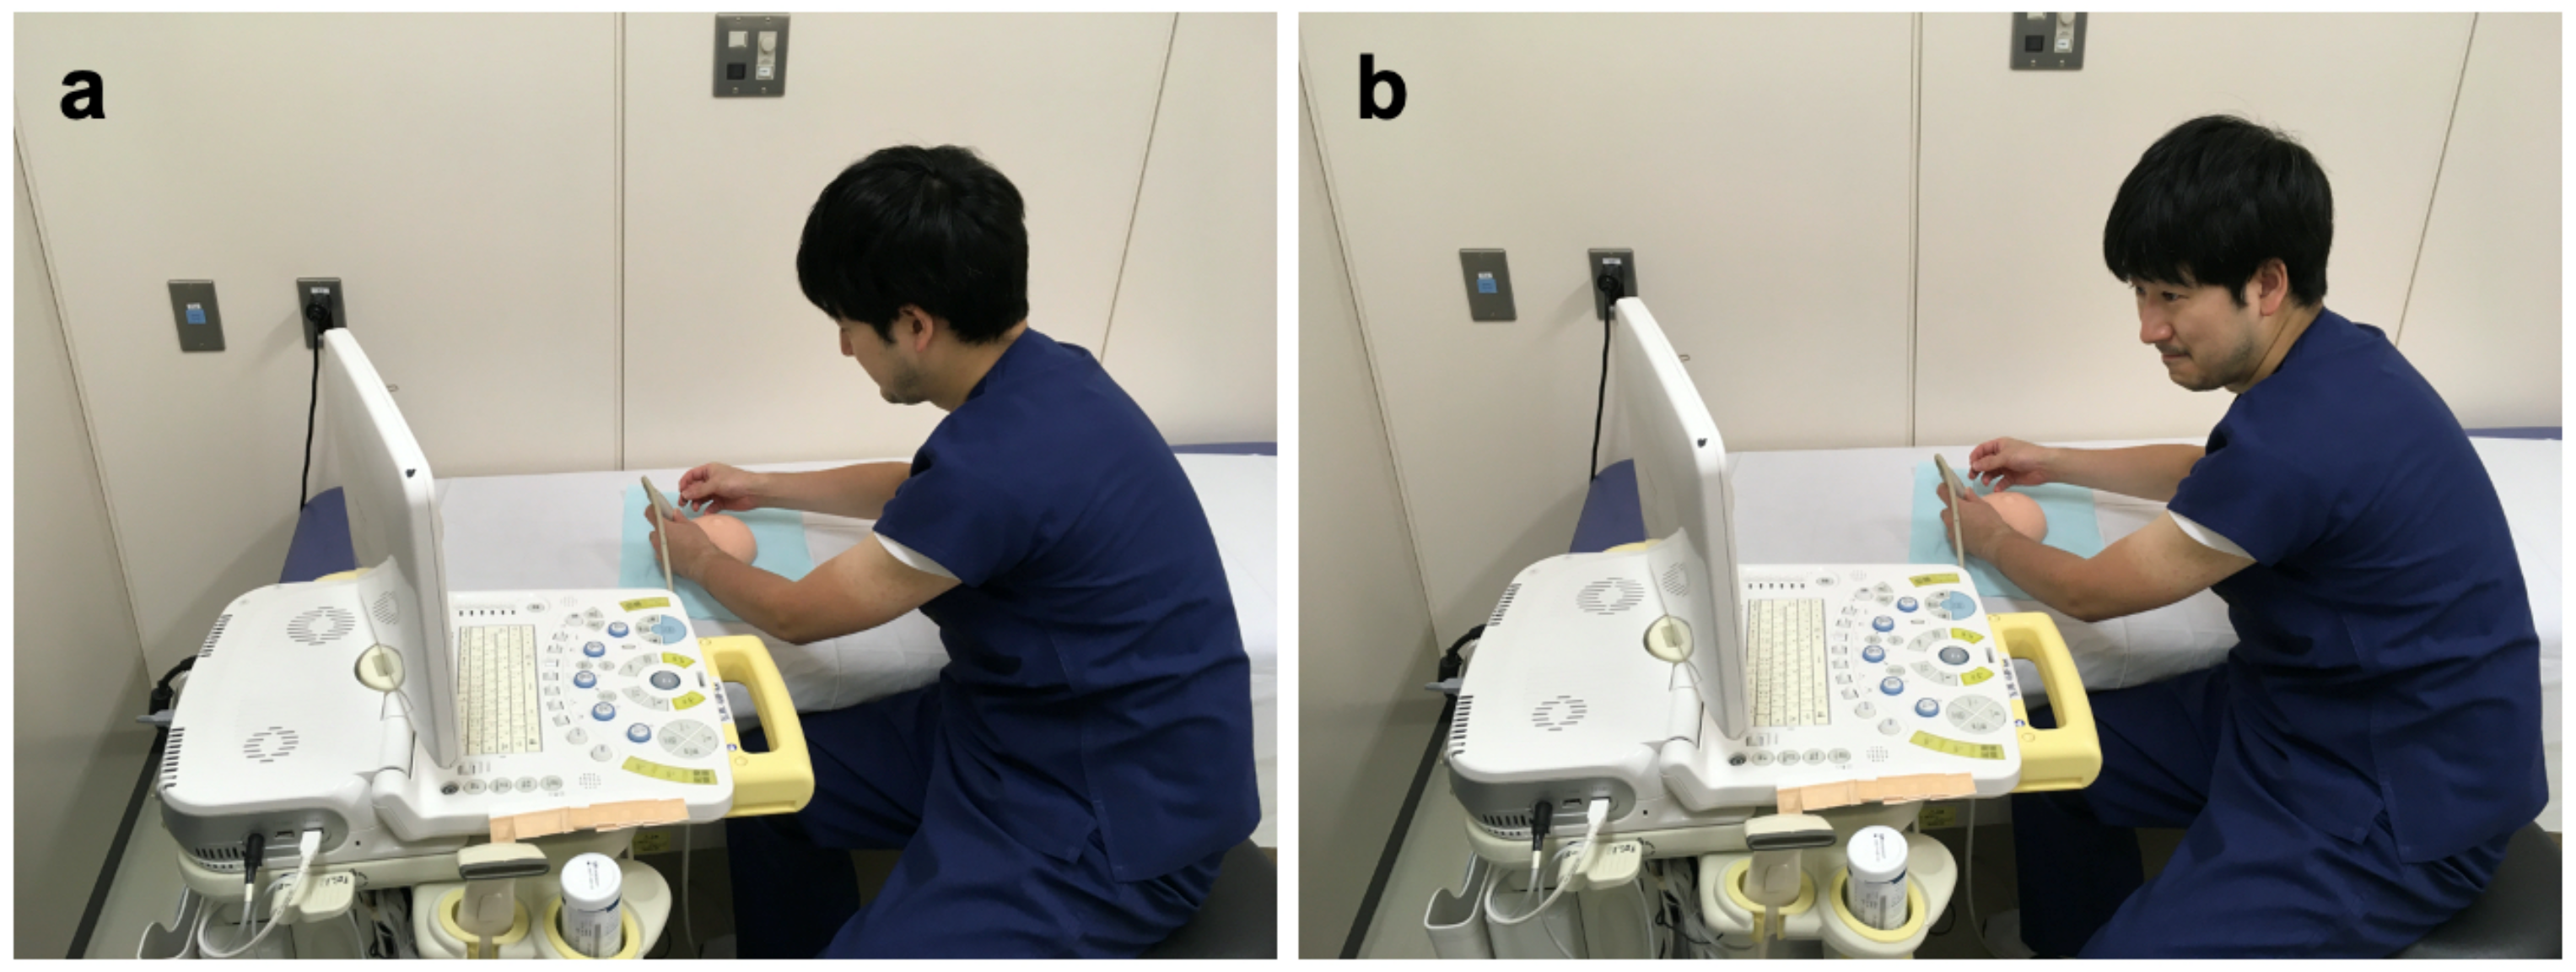 JCM Free Full-Text The Advantage of Using an Optical See-Through Head-Mounted Display in Ultrasonography-Guided Needle Biopsy Procedures A Prospective Randomized Study